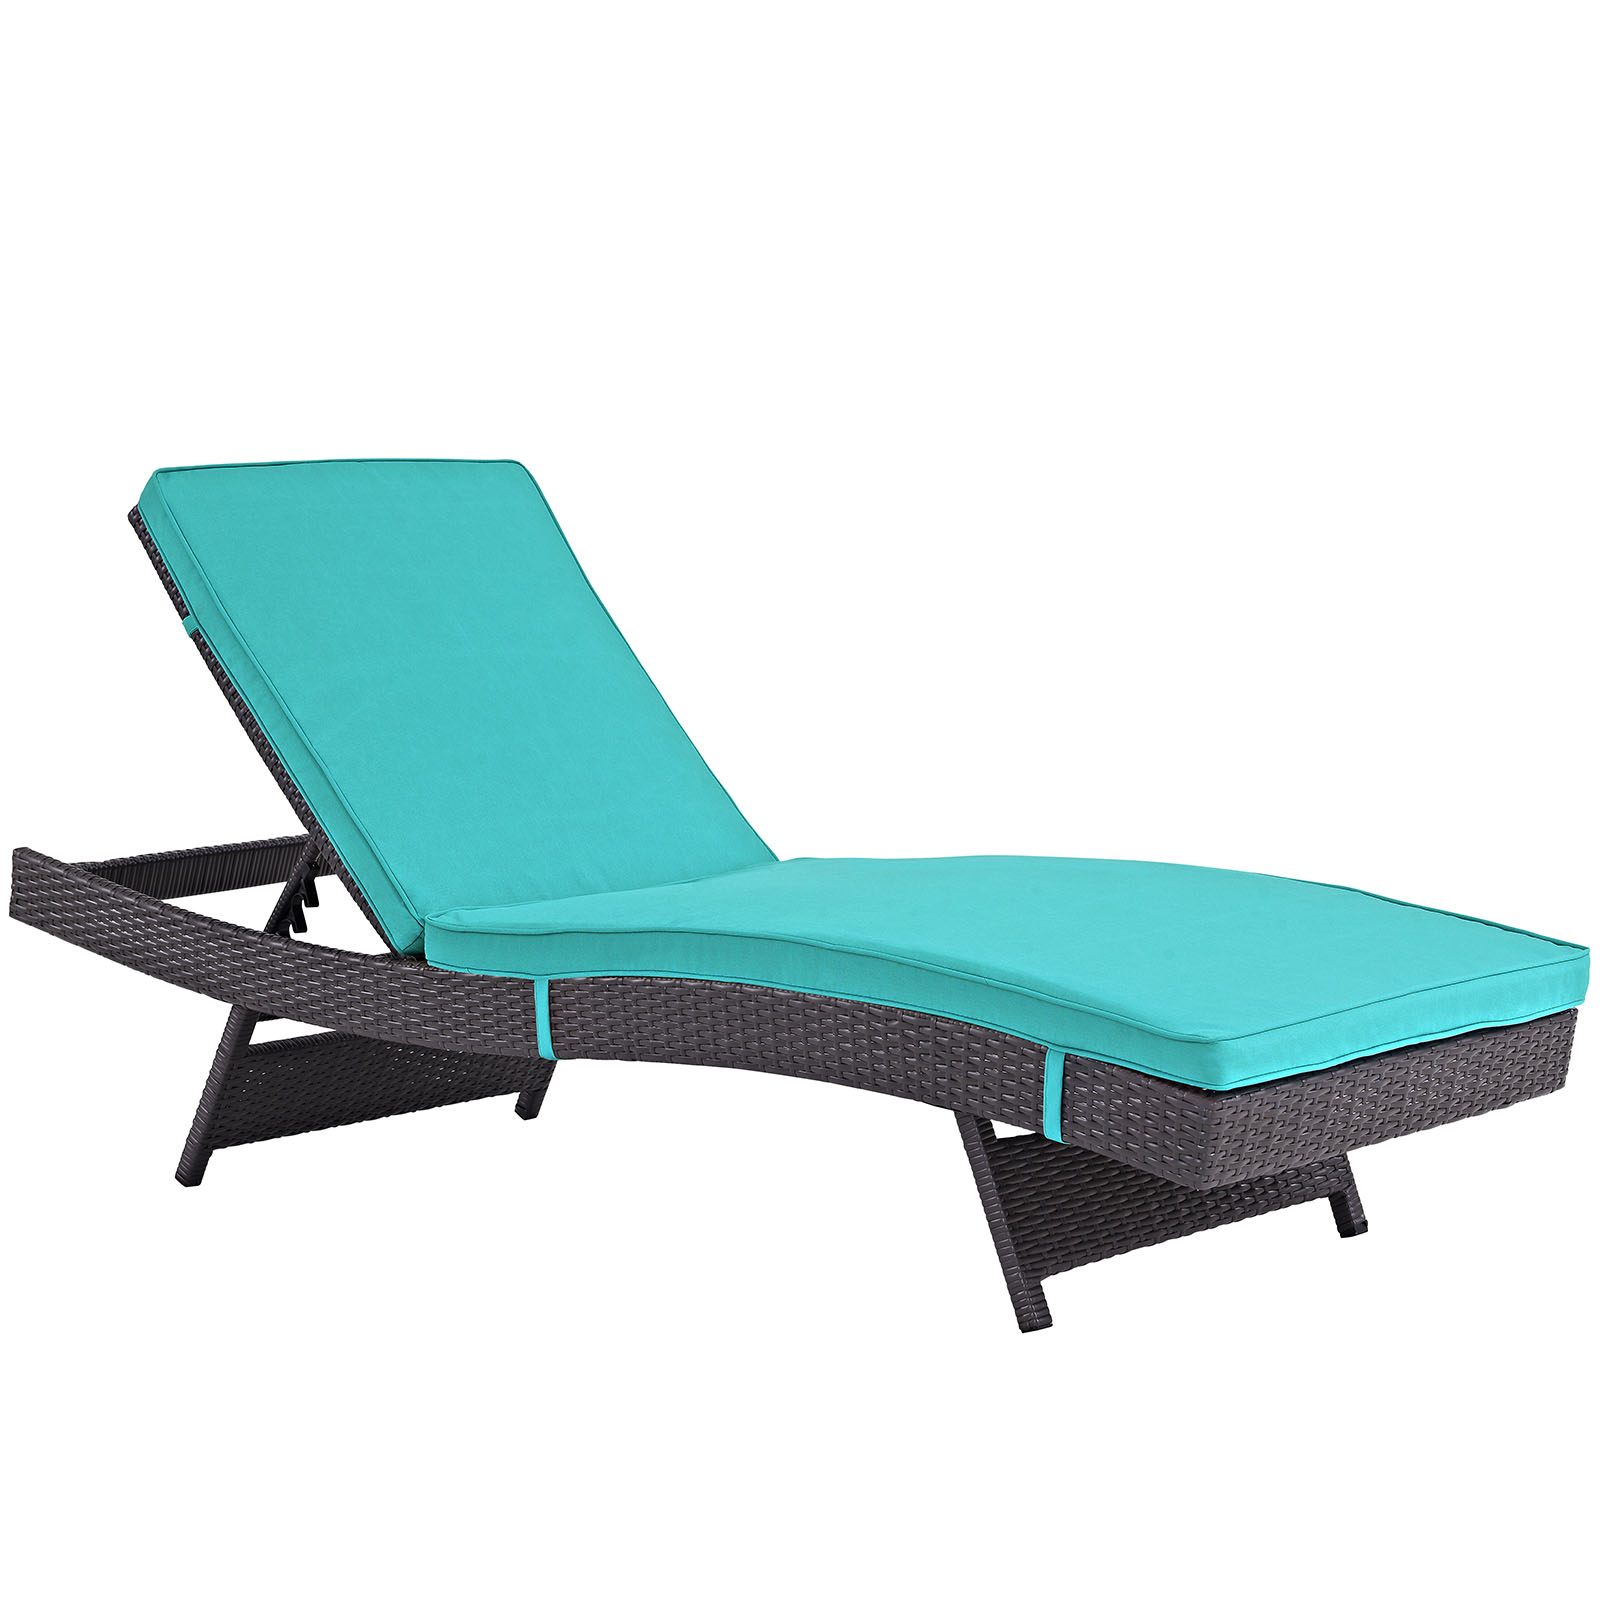 Modway Convene Chaise Outdoor Patio Set of 4 in Espresso Turquoise - image 3 of 5